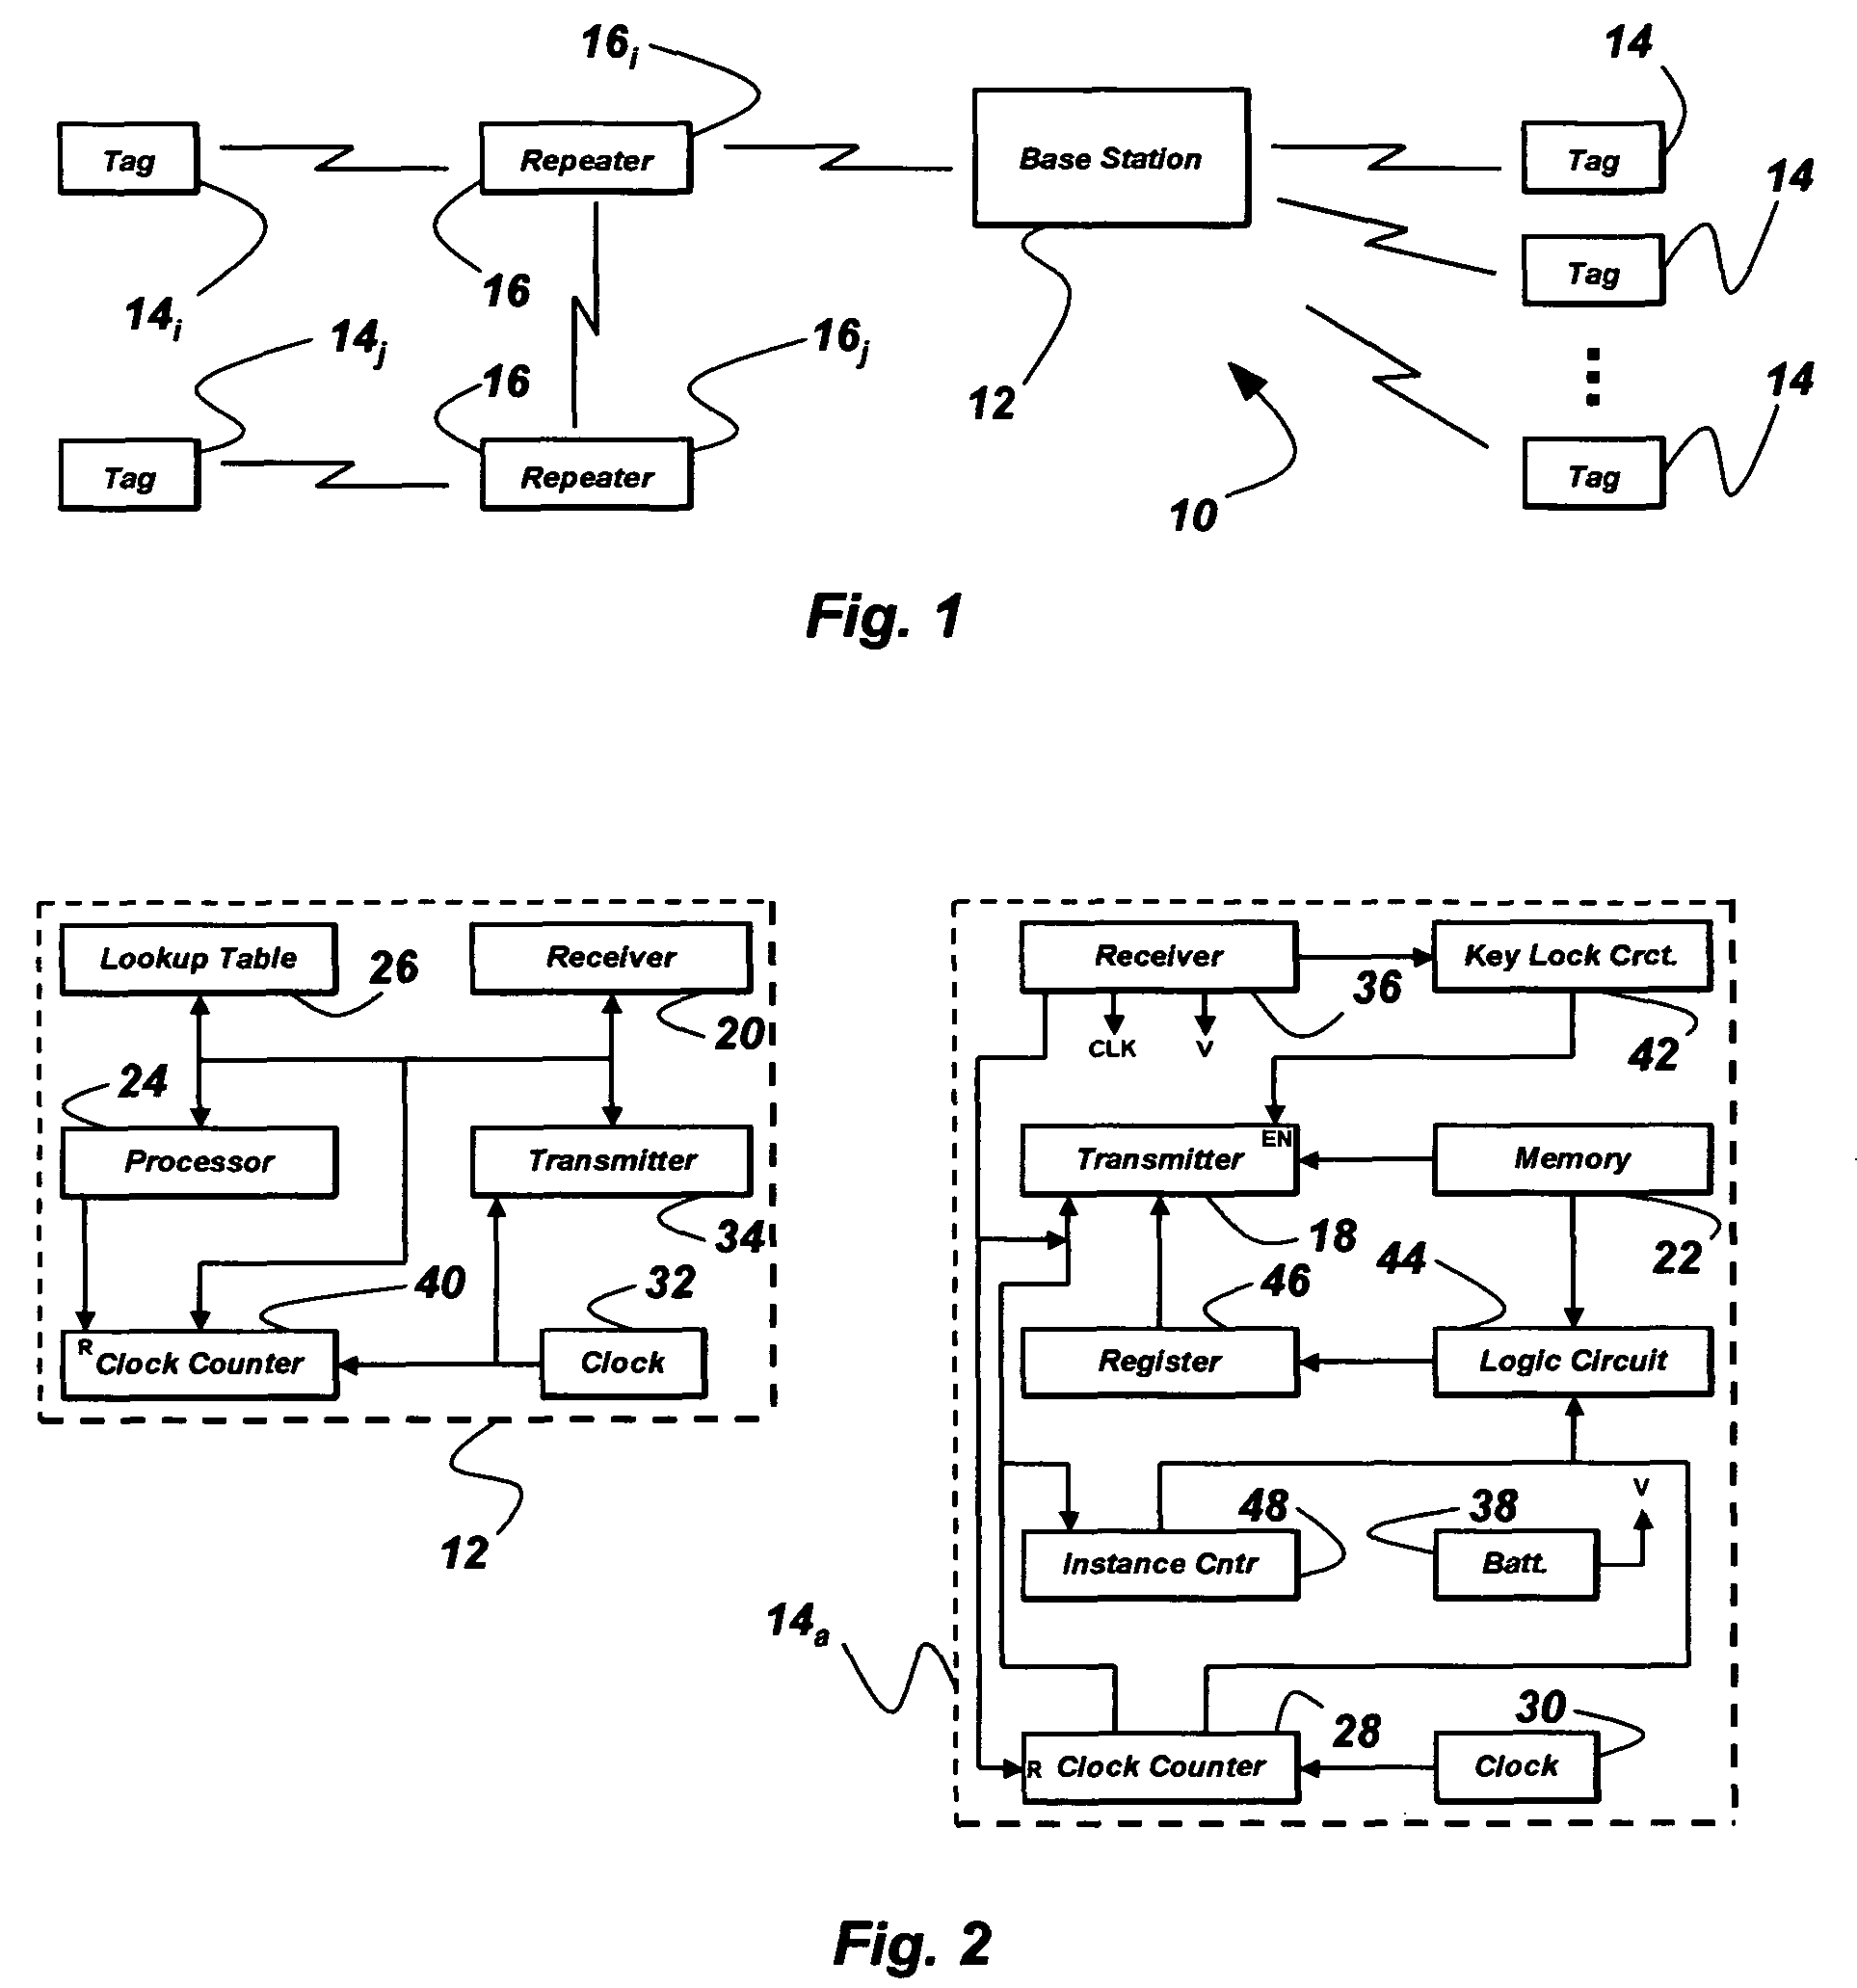 System and method for electronic article surveillance